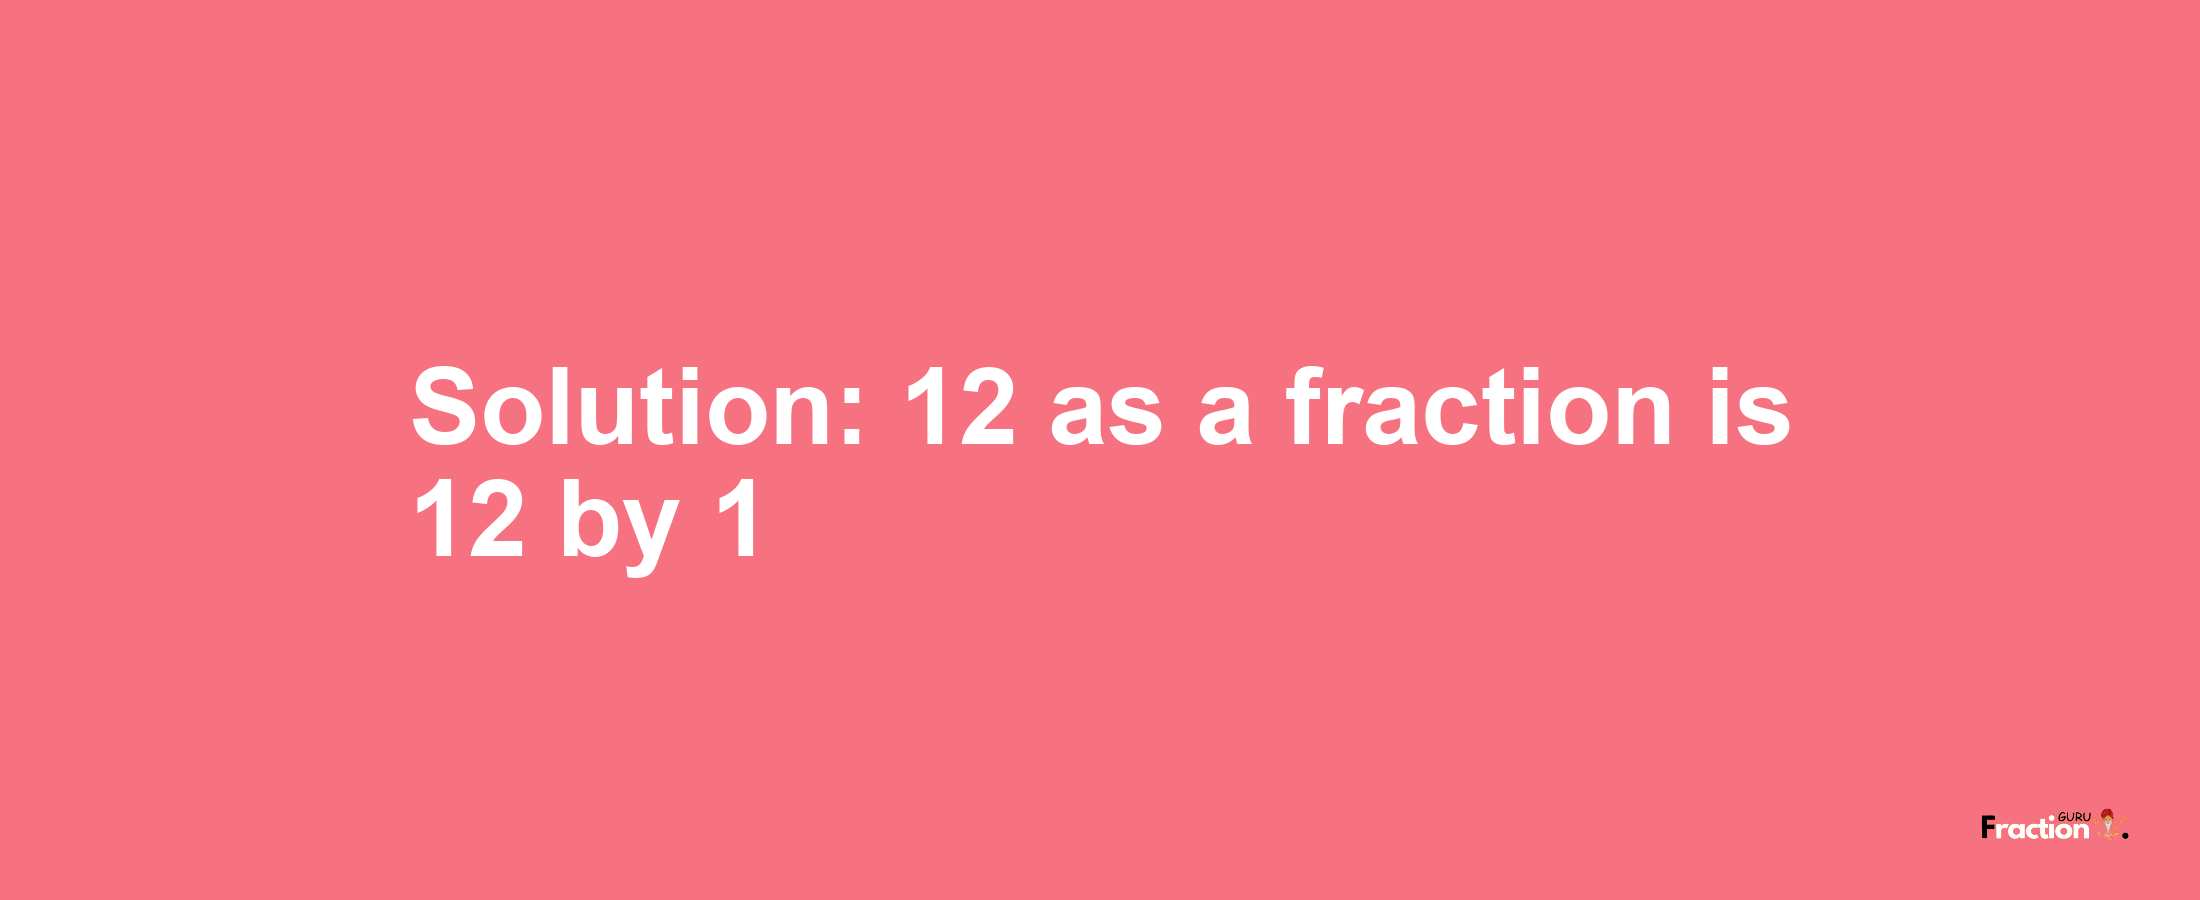 Solution:12 as a fraction is 12/1